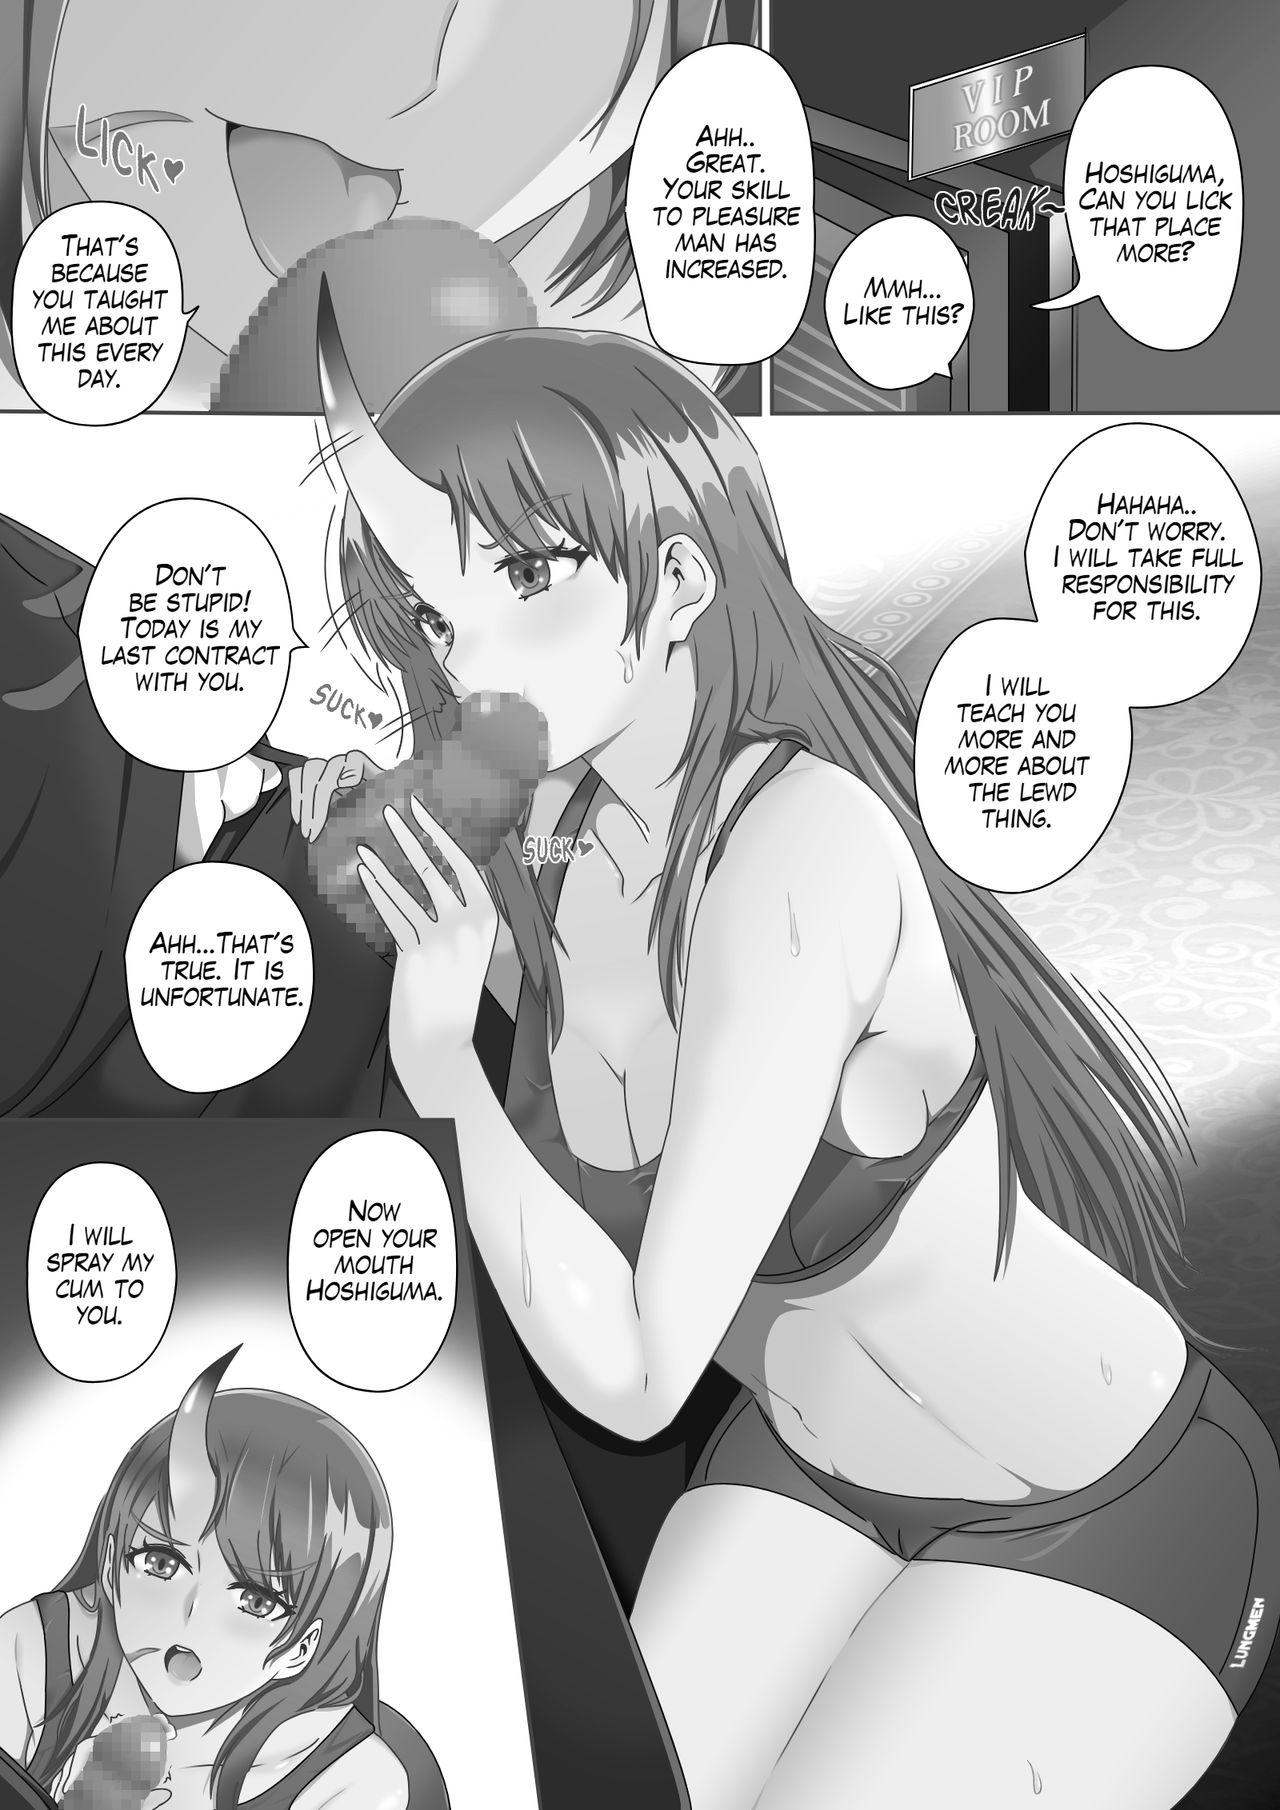 With Hoshiguma's Secret Contract - Arknights Alt - Page 4